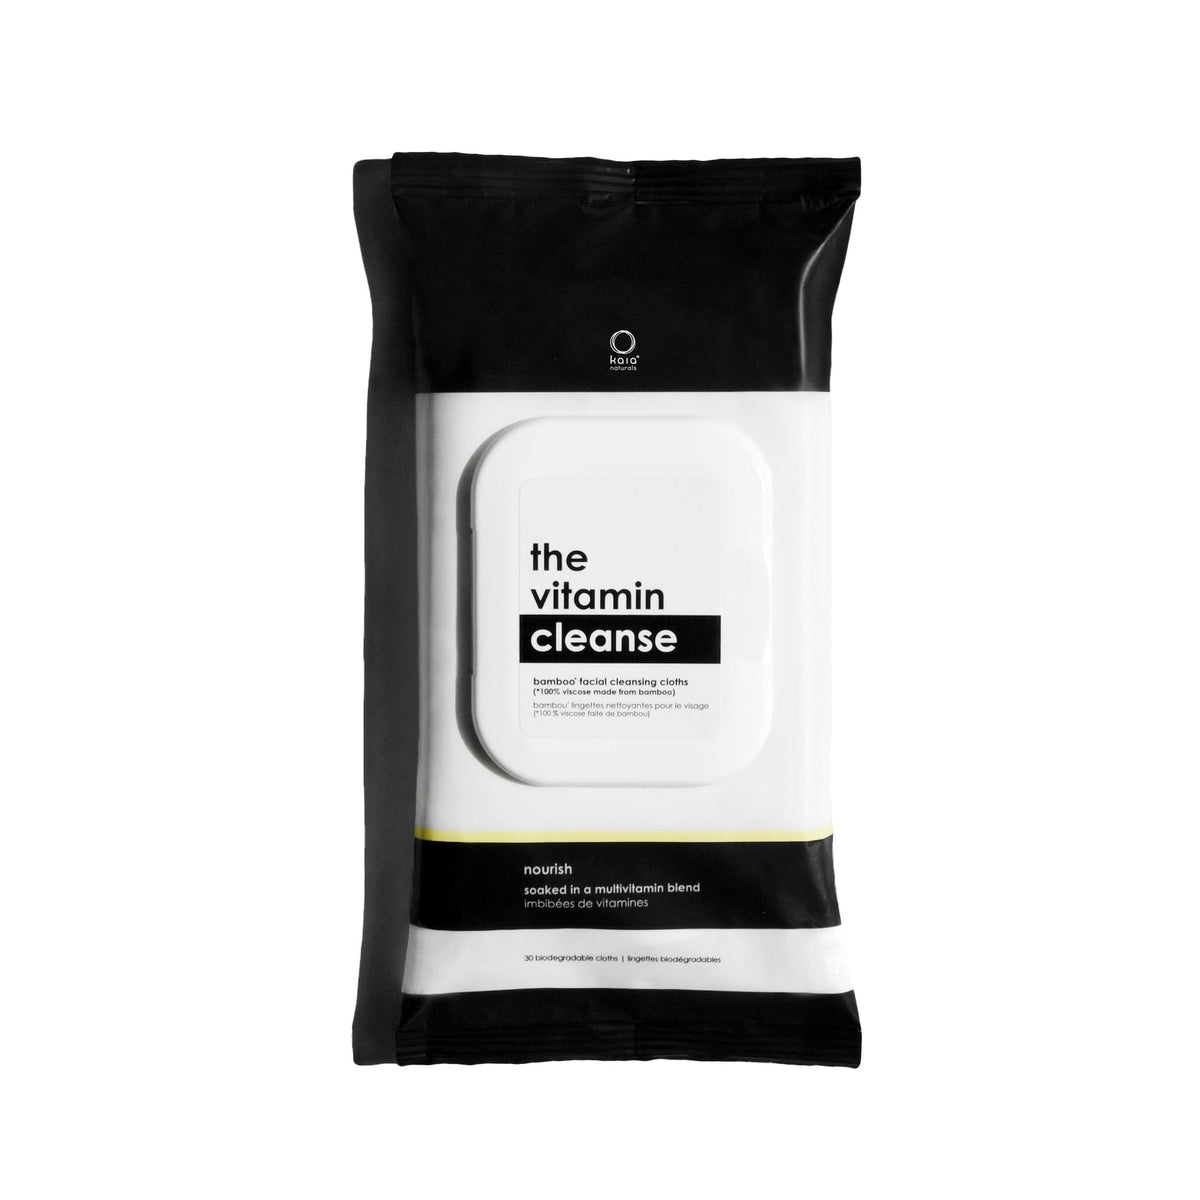 Kaia Naturals - The Vitamin Cleanse Wipes